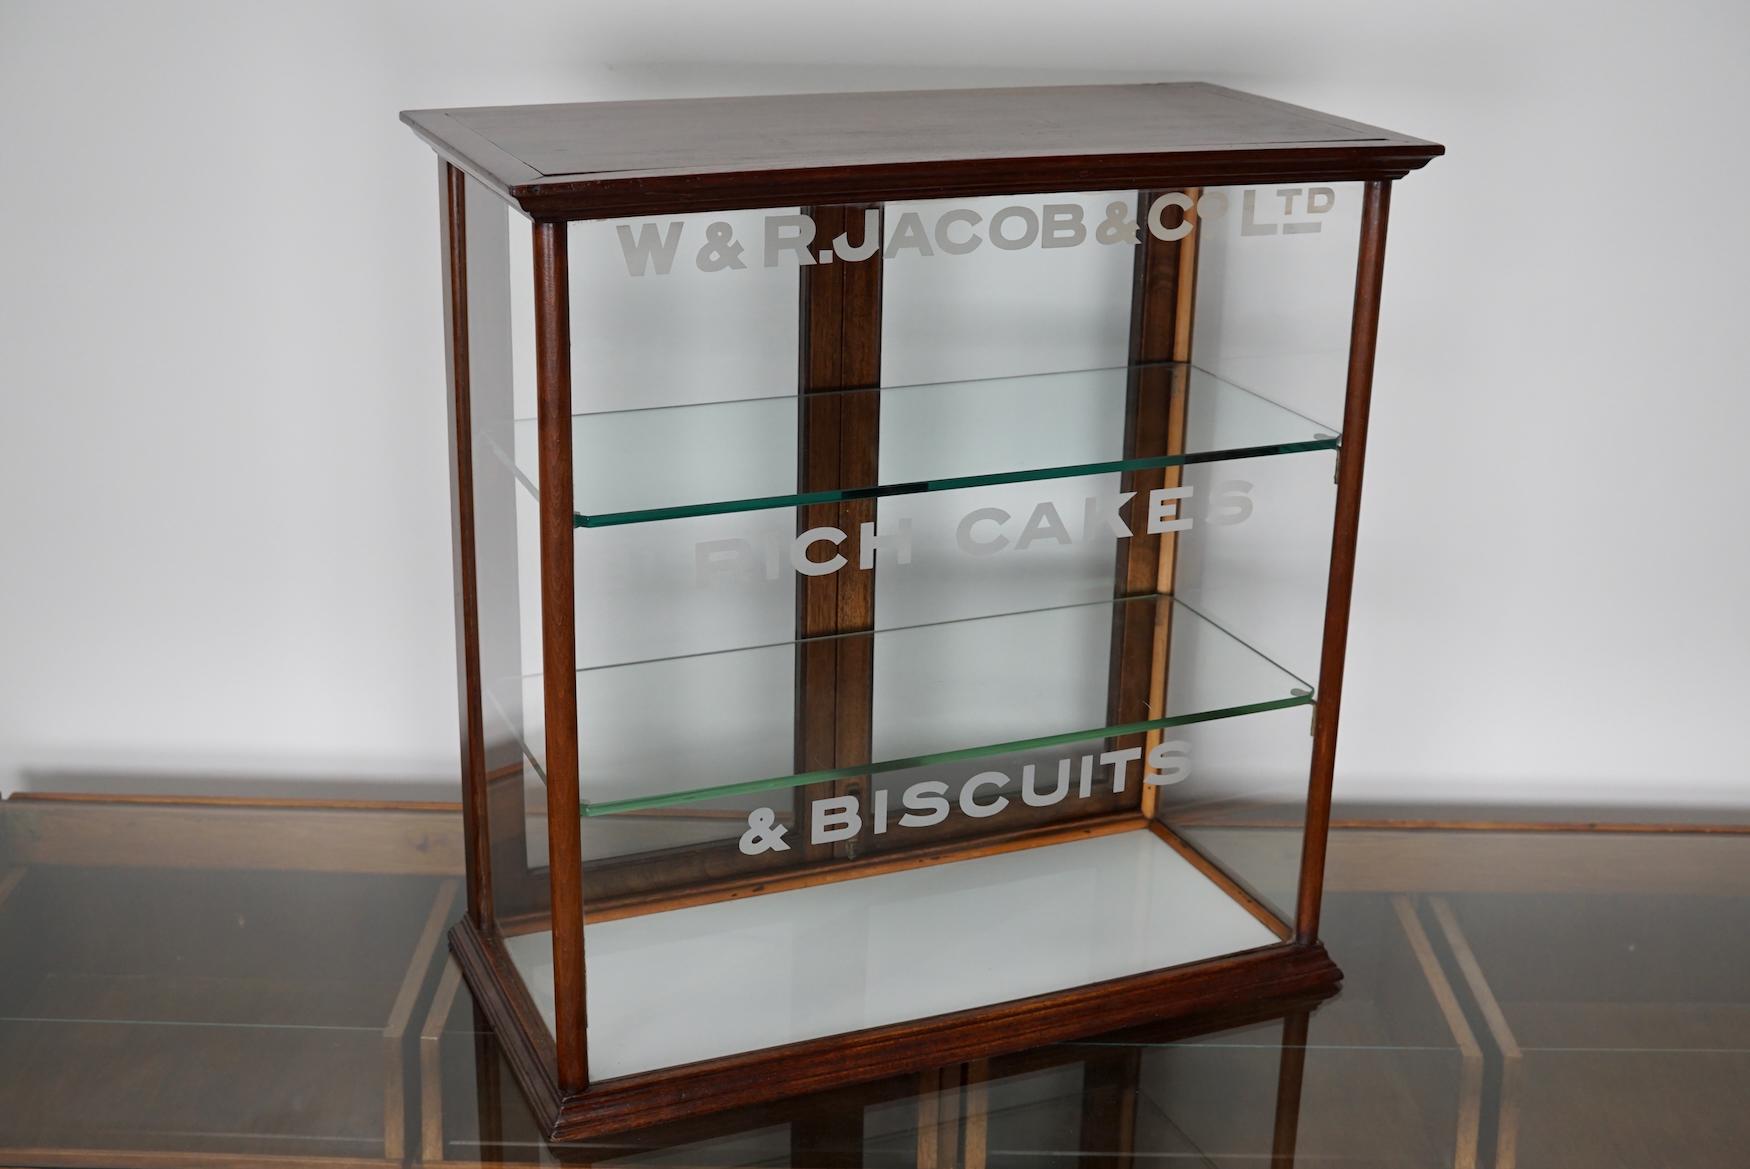 Mahogany Counter Top Cake & Biscuits Shop Display Cabinet, circa 1900 For Sale 4